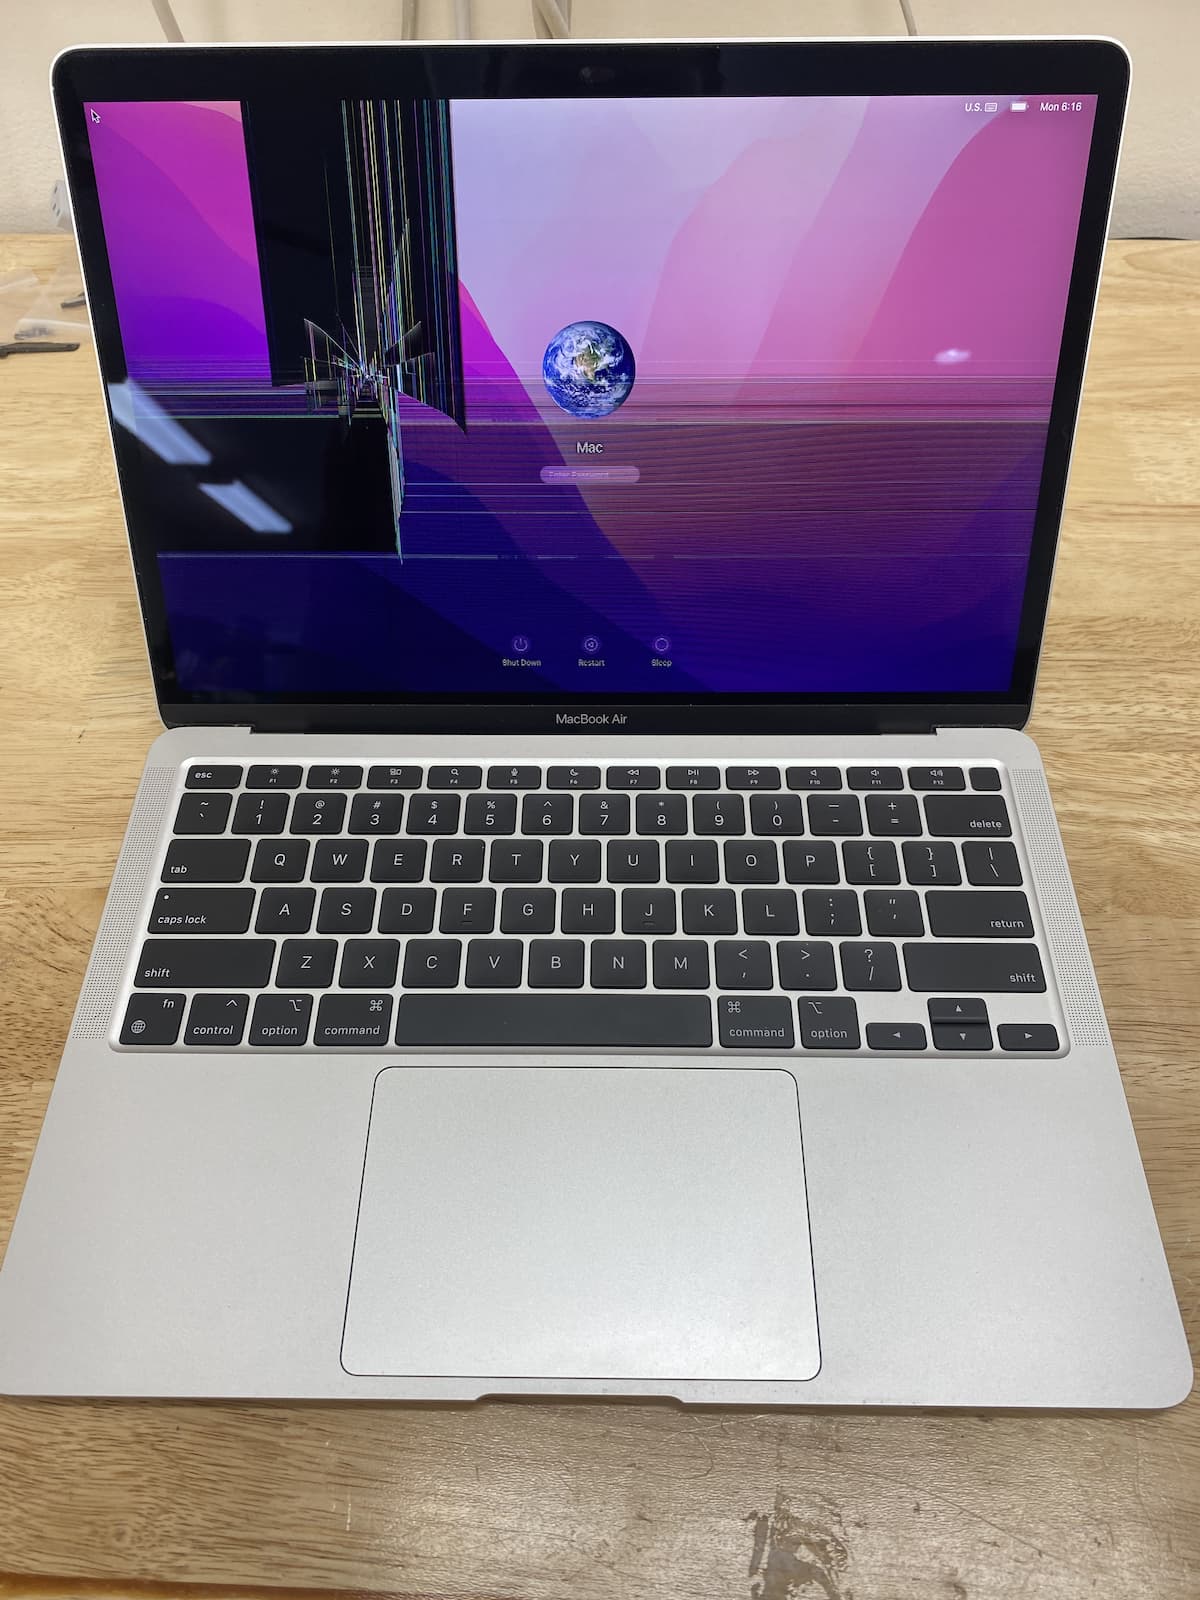 MacBook Air with cracked screen.